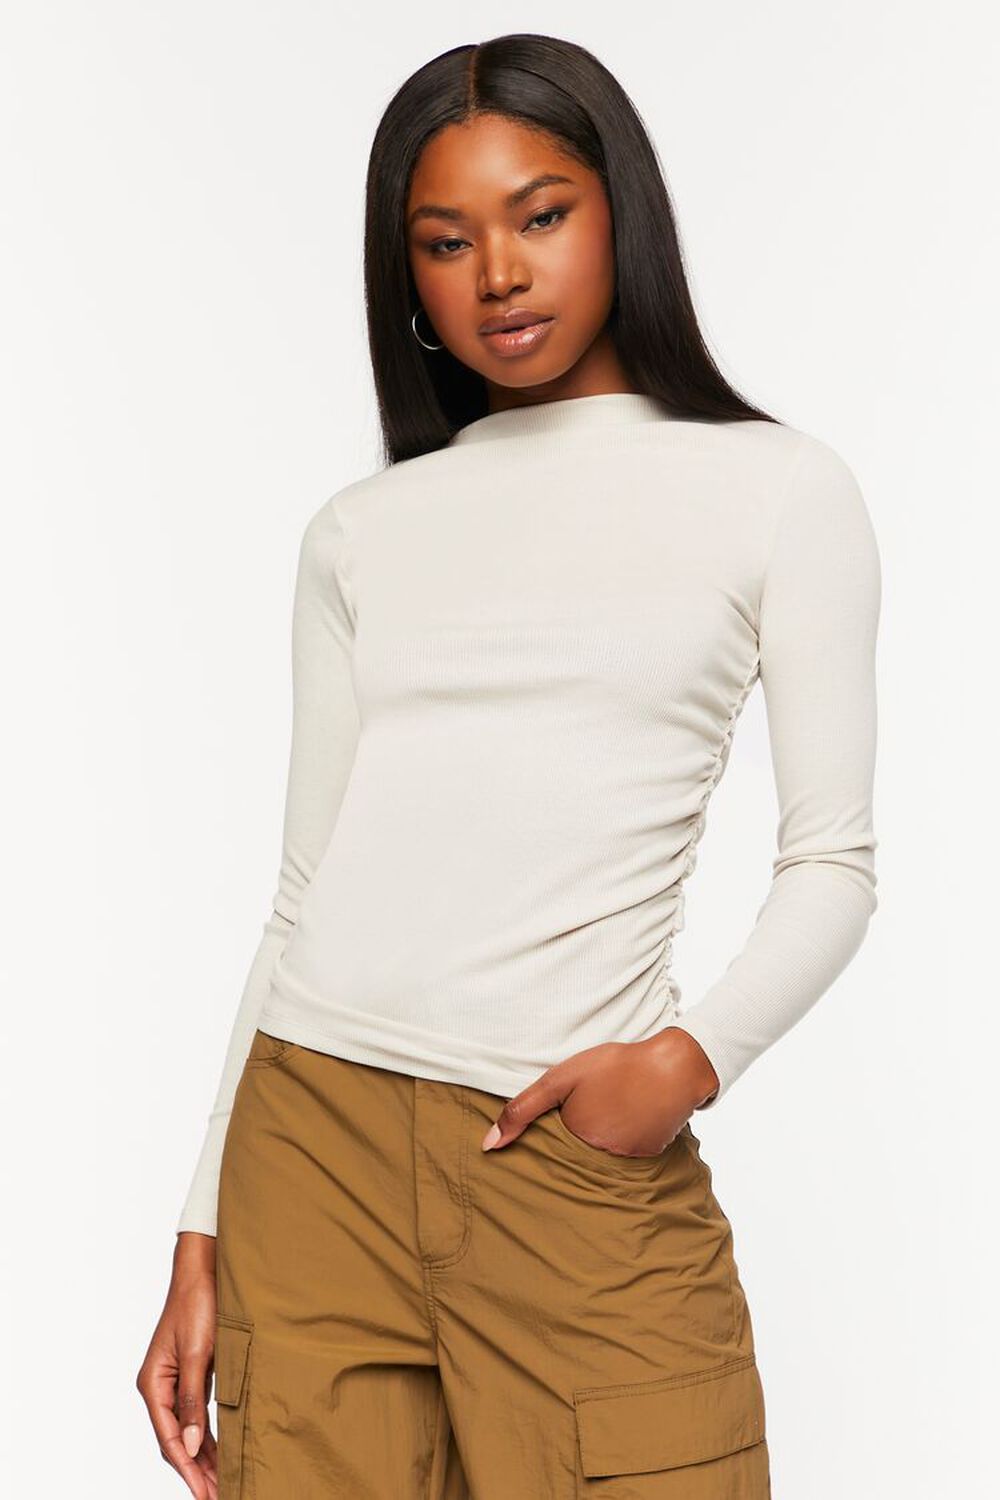 NEUTRAL GREY Ruched Mock Neck Long-Sleeve Top, image 1